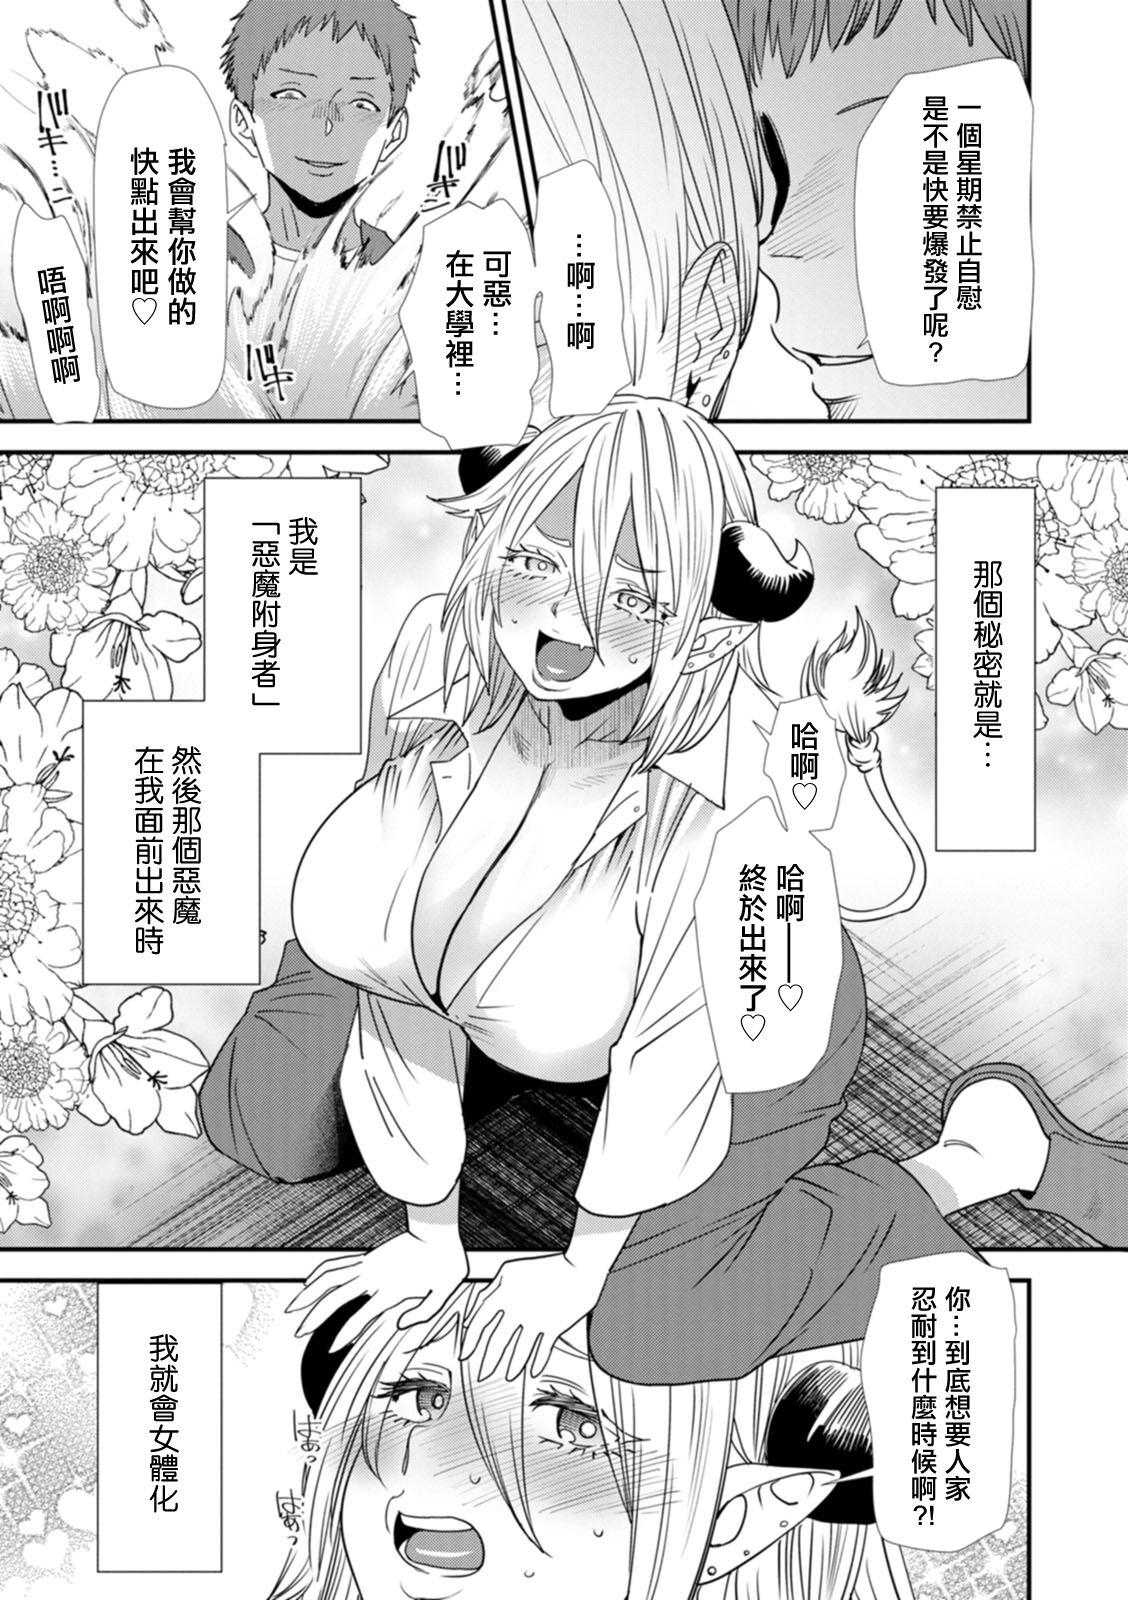 Trimmed Inma Joshi Daisei no Yuuutsu - The Melancholy of the Succubus who is a college student Ch. 9 Dildo Fucking - Page 7